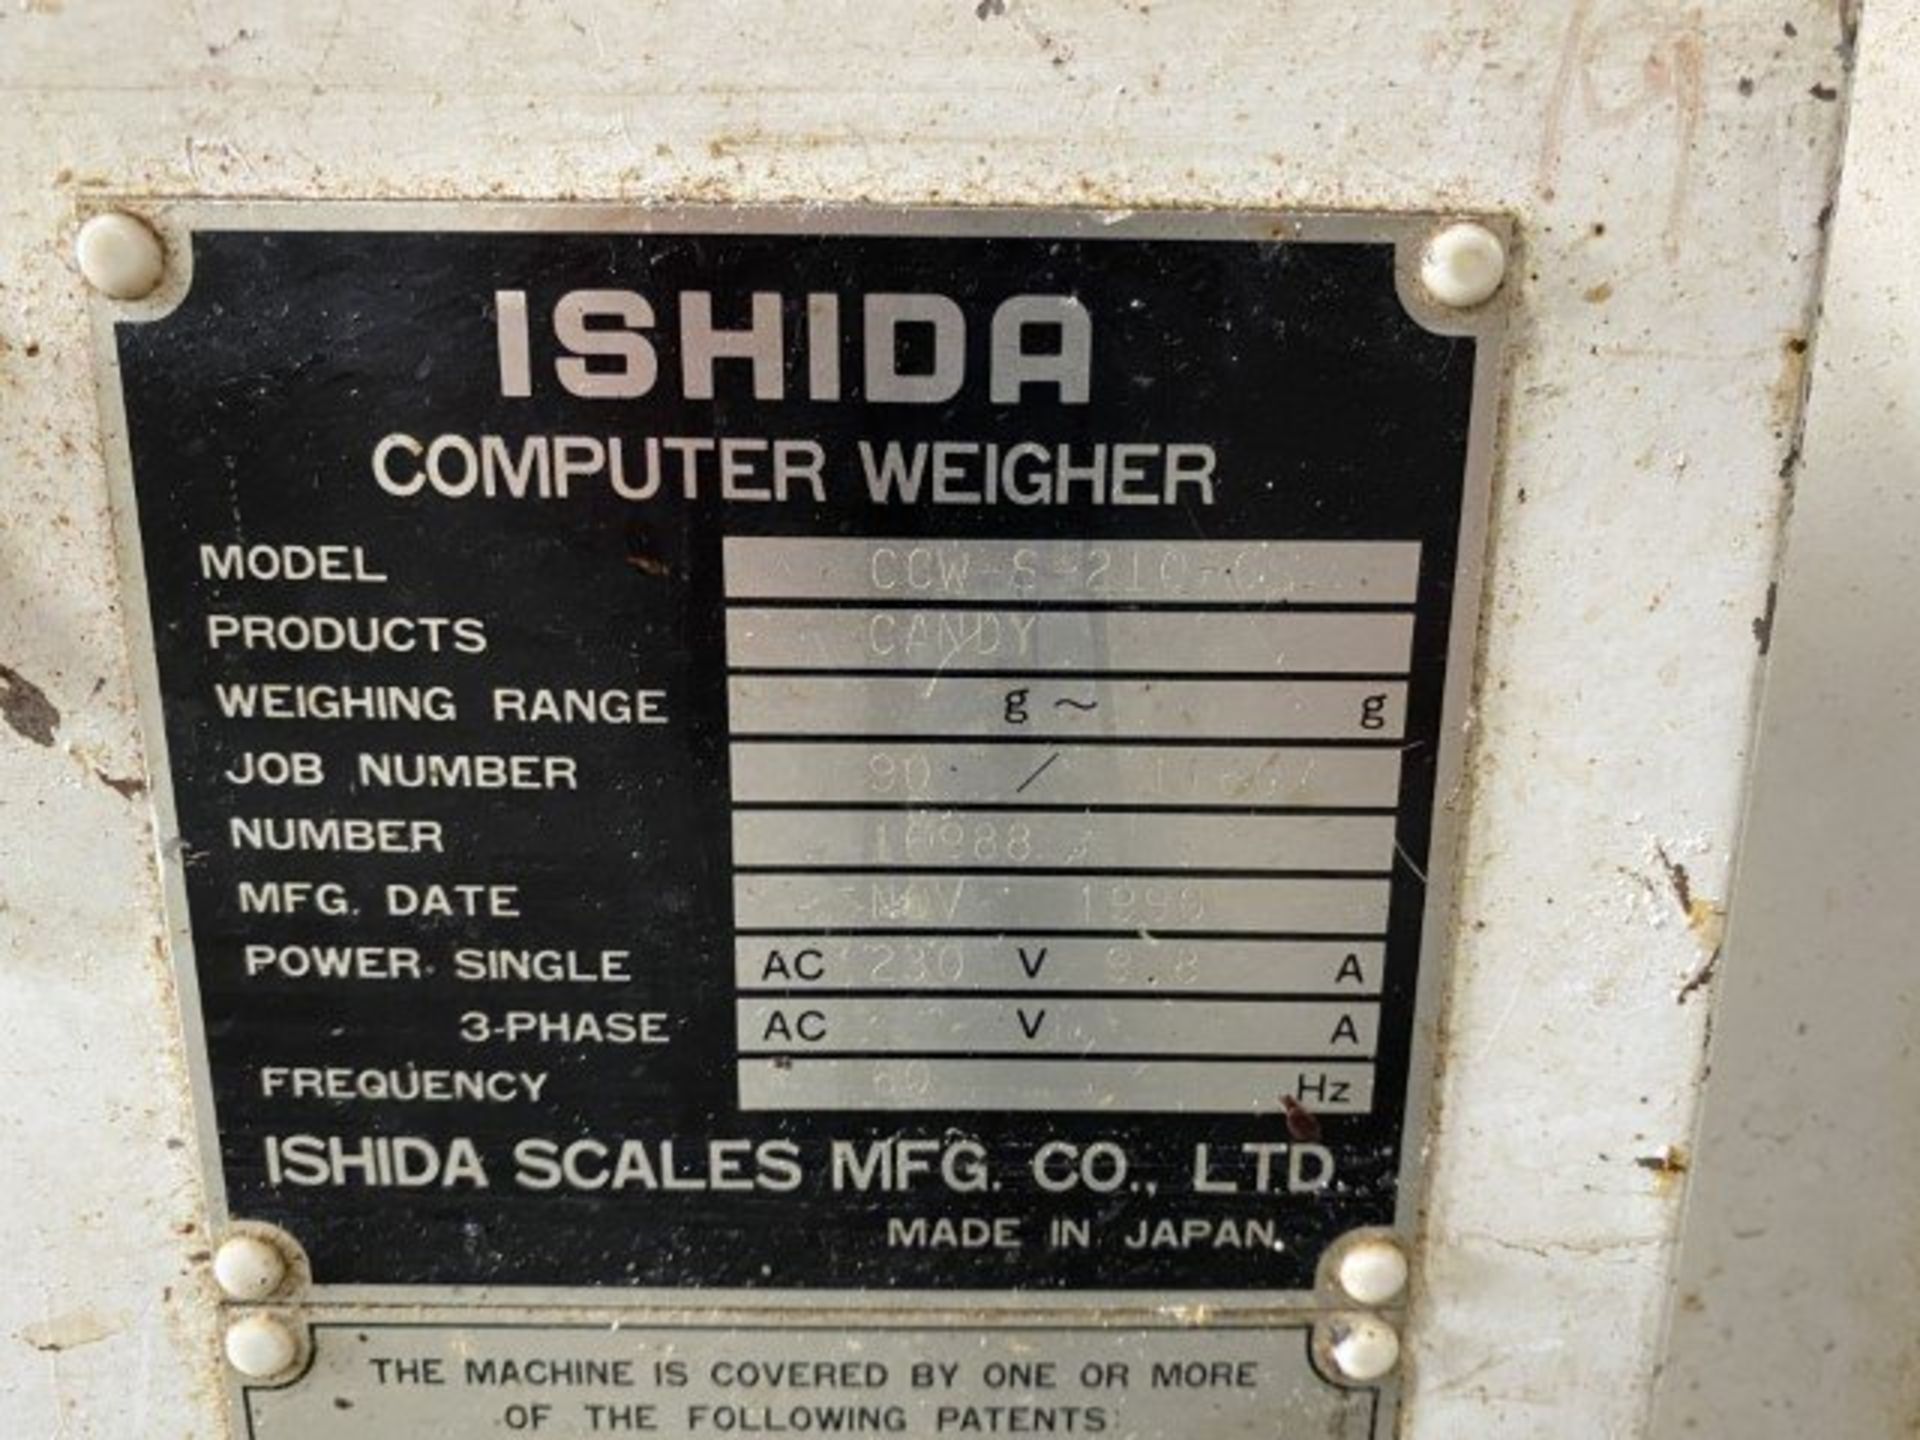 Ishida Multihead CCW Weigher - A 14-head Computer Combination Weigher ideal for candy, but handles a - Image 3 of 3